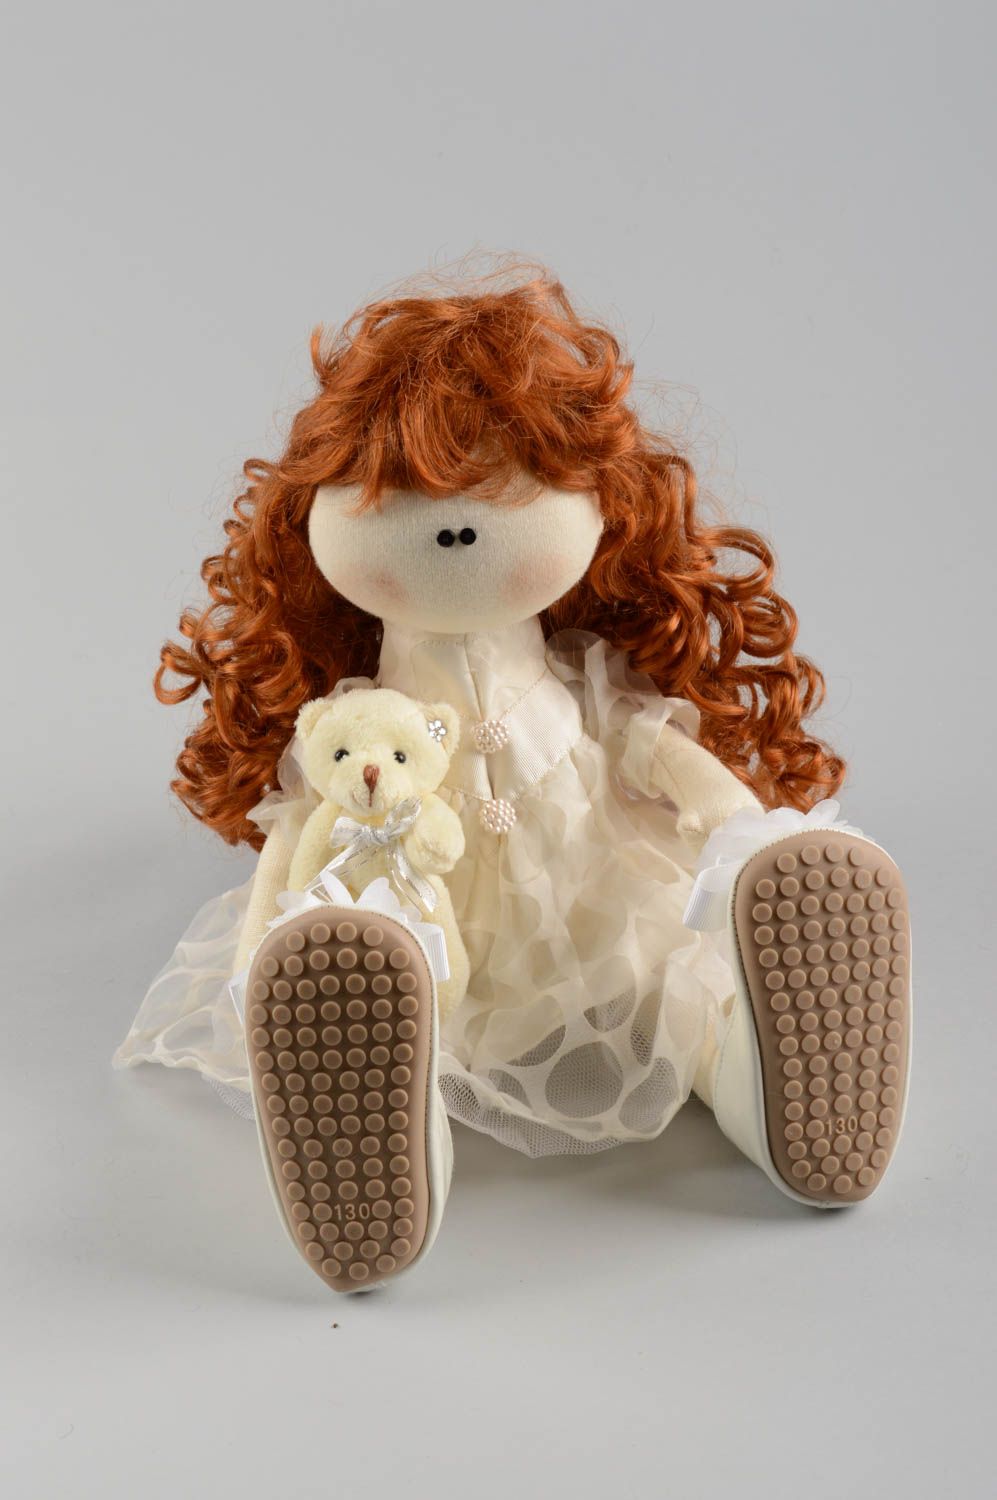 Handmade designer soft doll sewn of linen cute girl with curly hair in dress photo 4